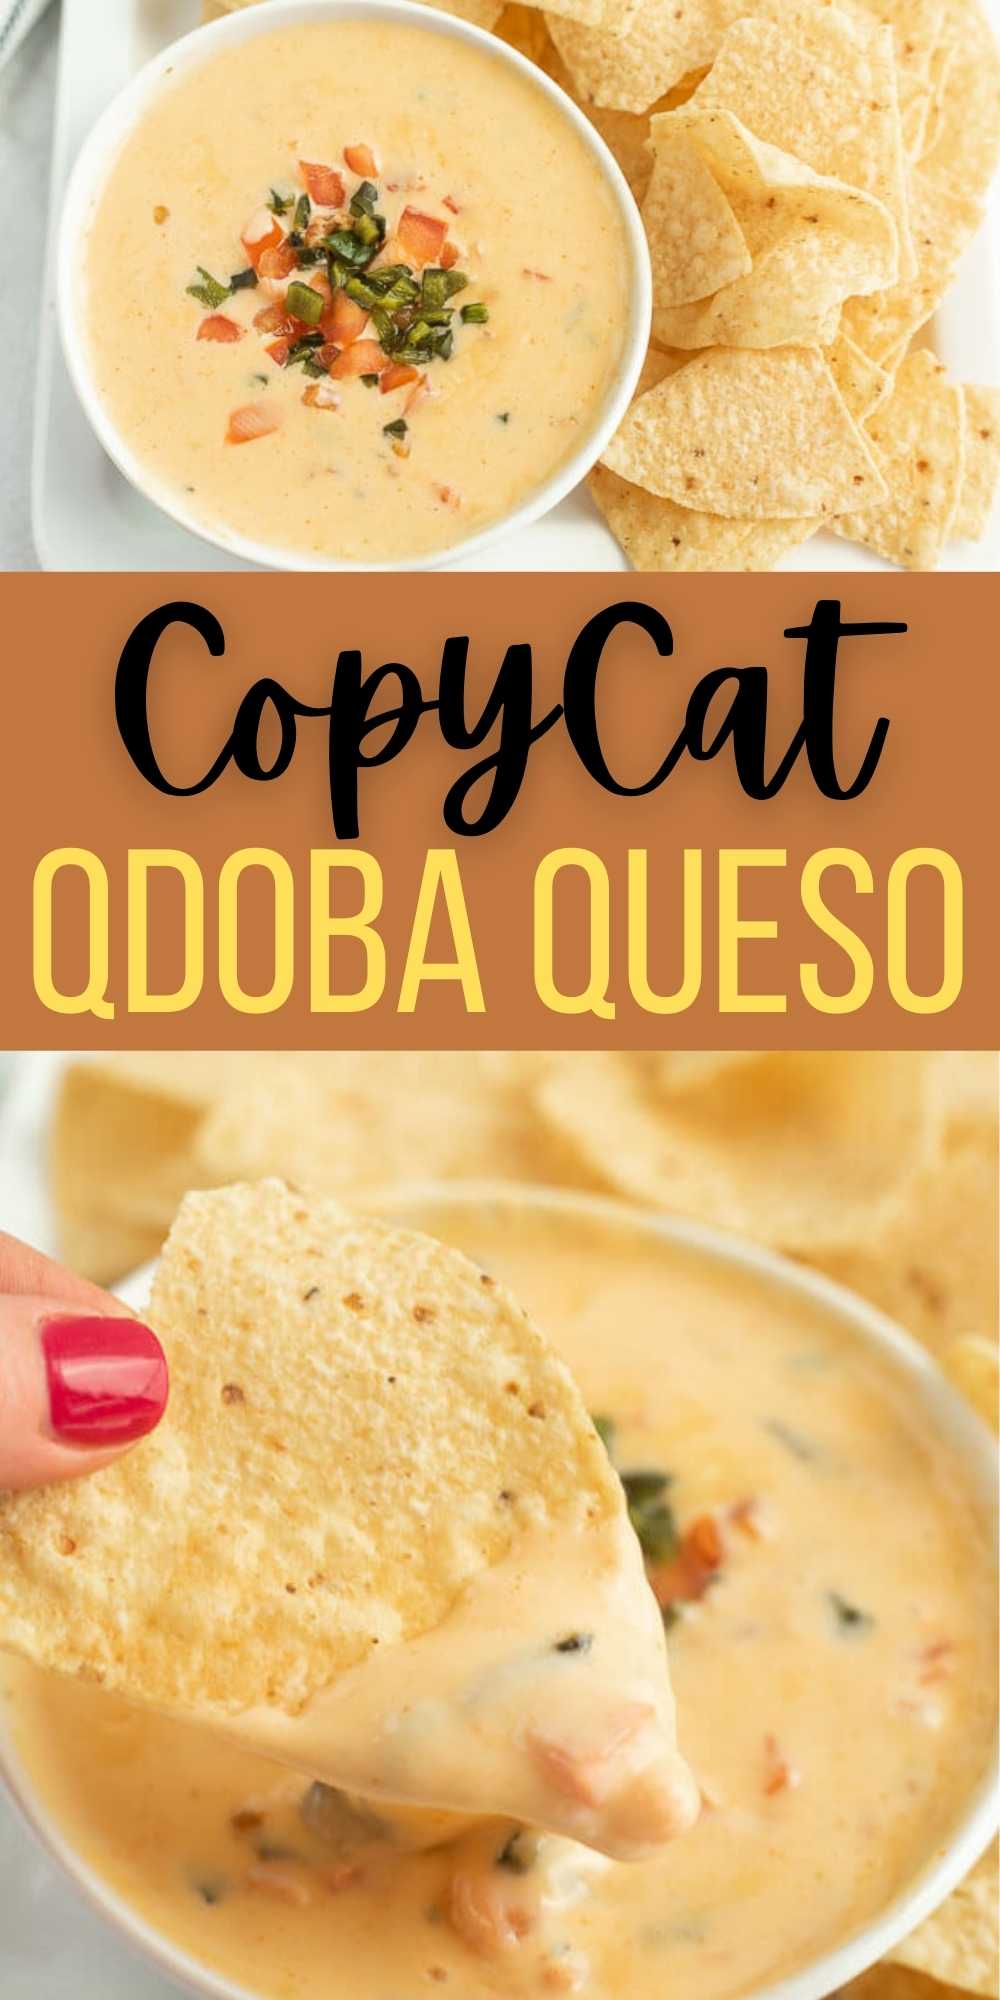 Do you love Qdoba's Queso? Now you can make Copycat Qdoba Queso Recipe at home. This creamy queso is easy to make with easy ingredients. You’ll be surprised how easy it is to make Qdoba Dip at home.  #eatingonadime #copycatrecipes #quesorecipes #diprecipes 
